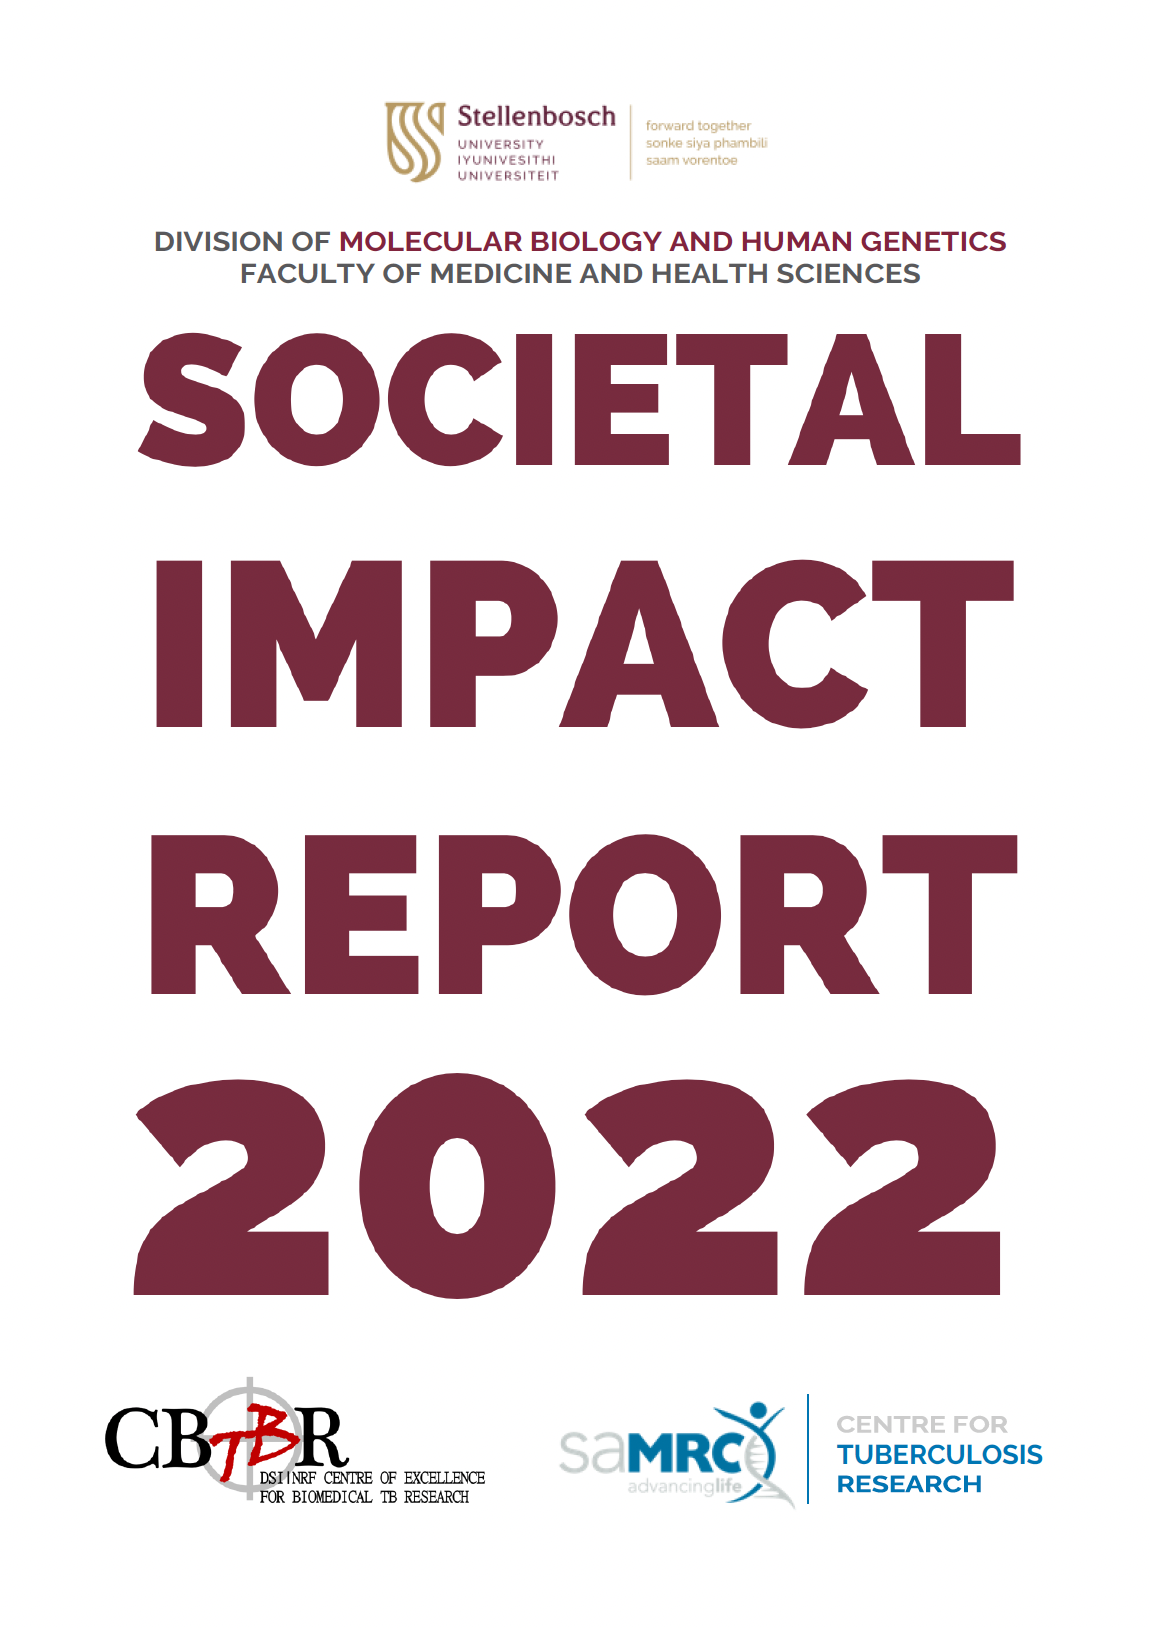 SI_Annual_Report_2020.png